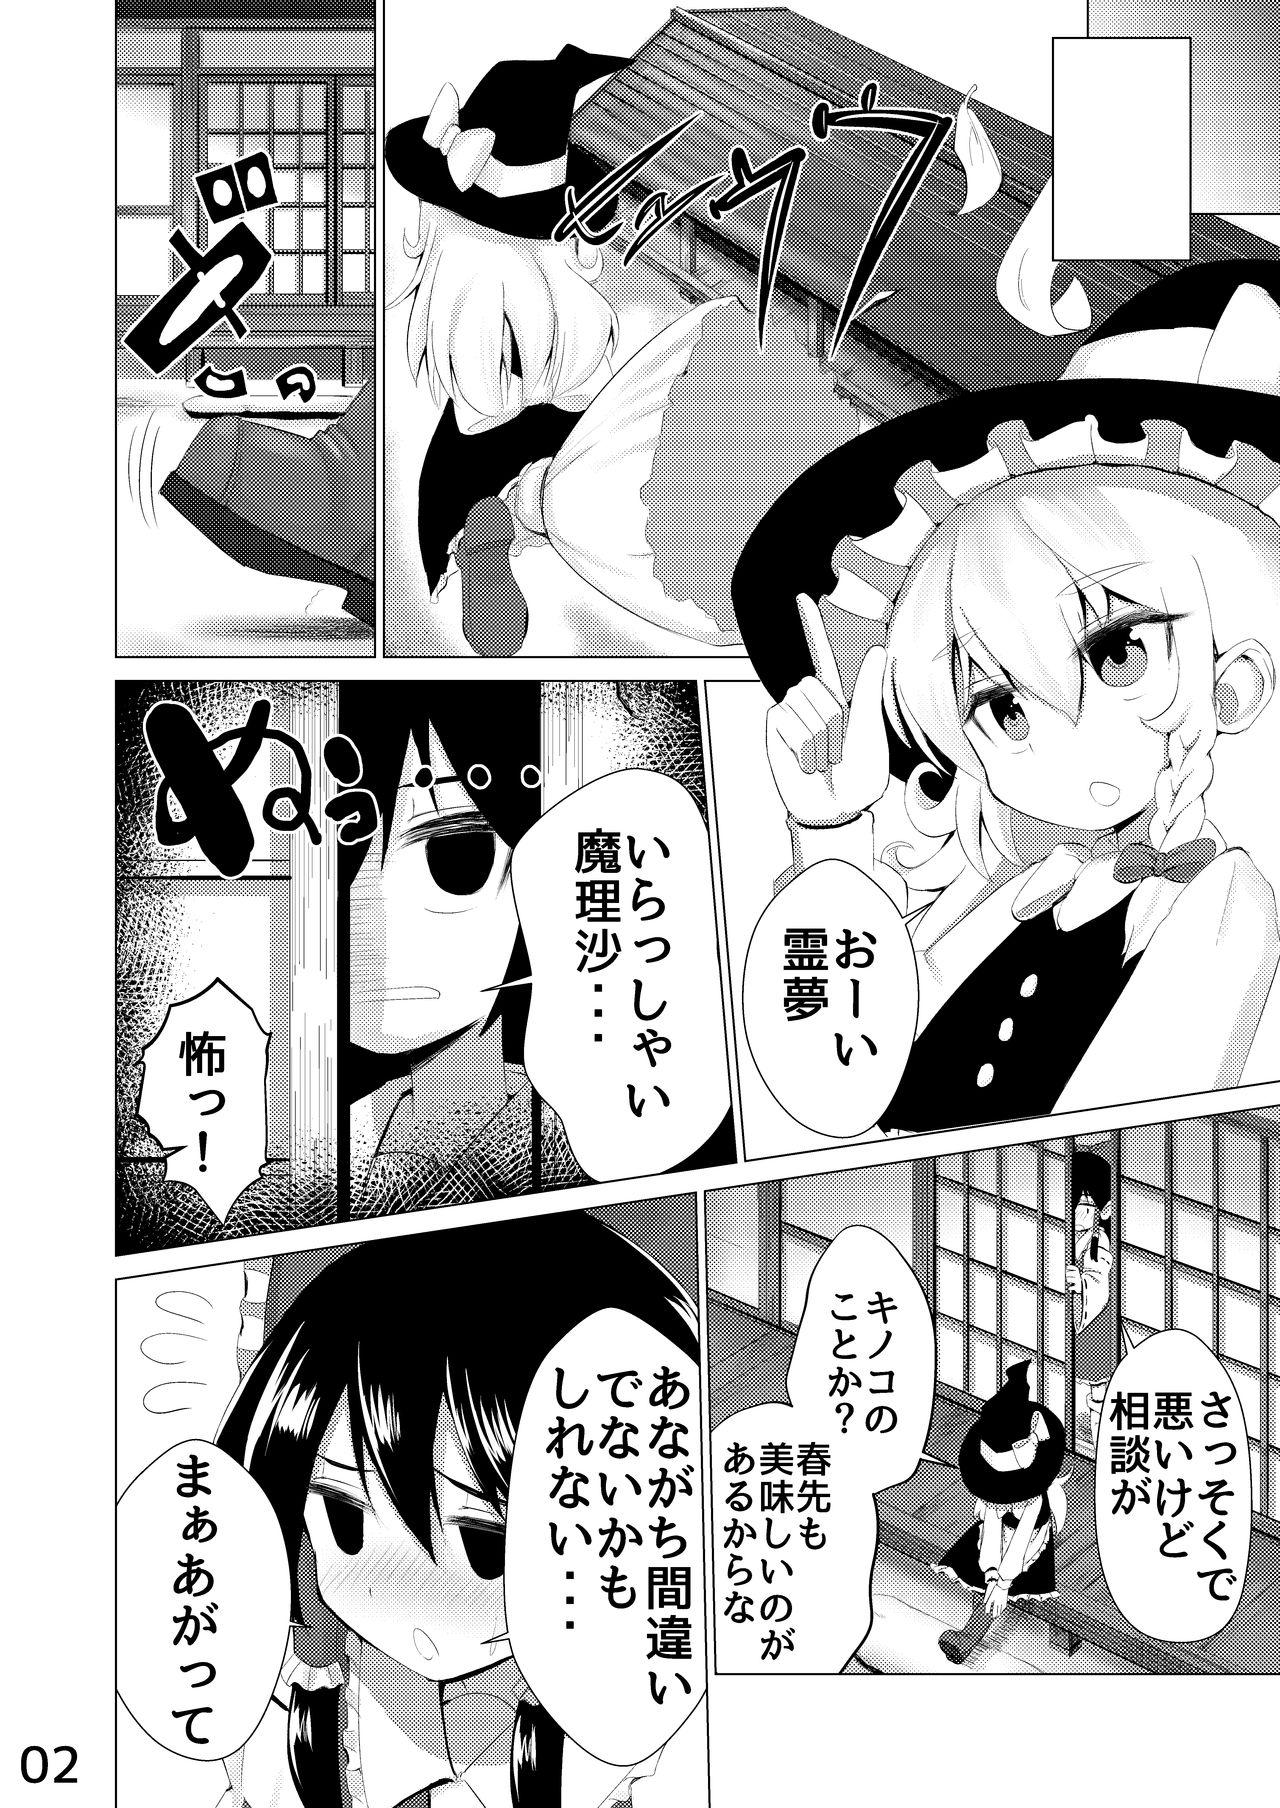 Collar [NO相撲KING (吸斬) 生えた (Touhou Project) [Digital] - Touhou project Girls - Page 3